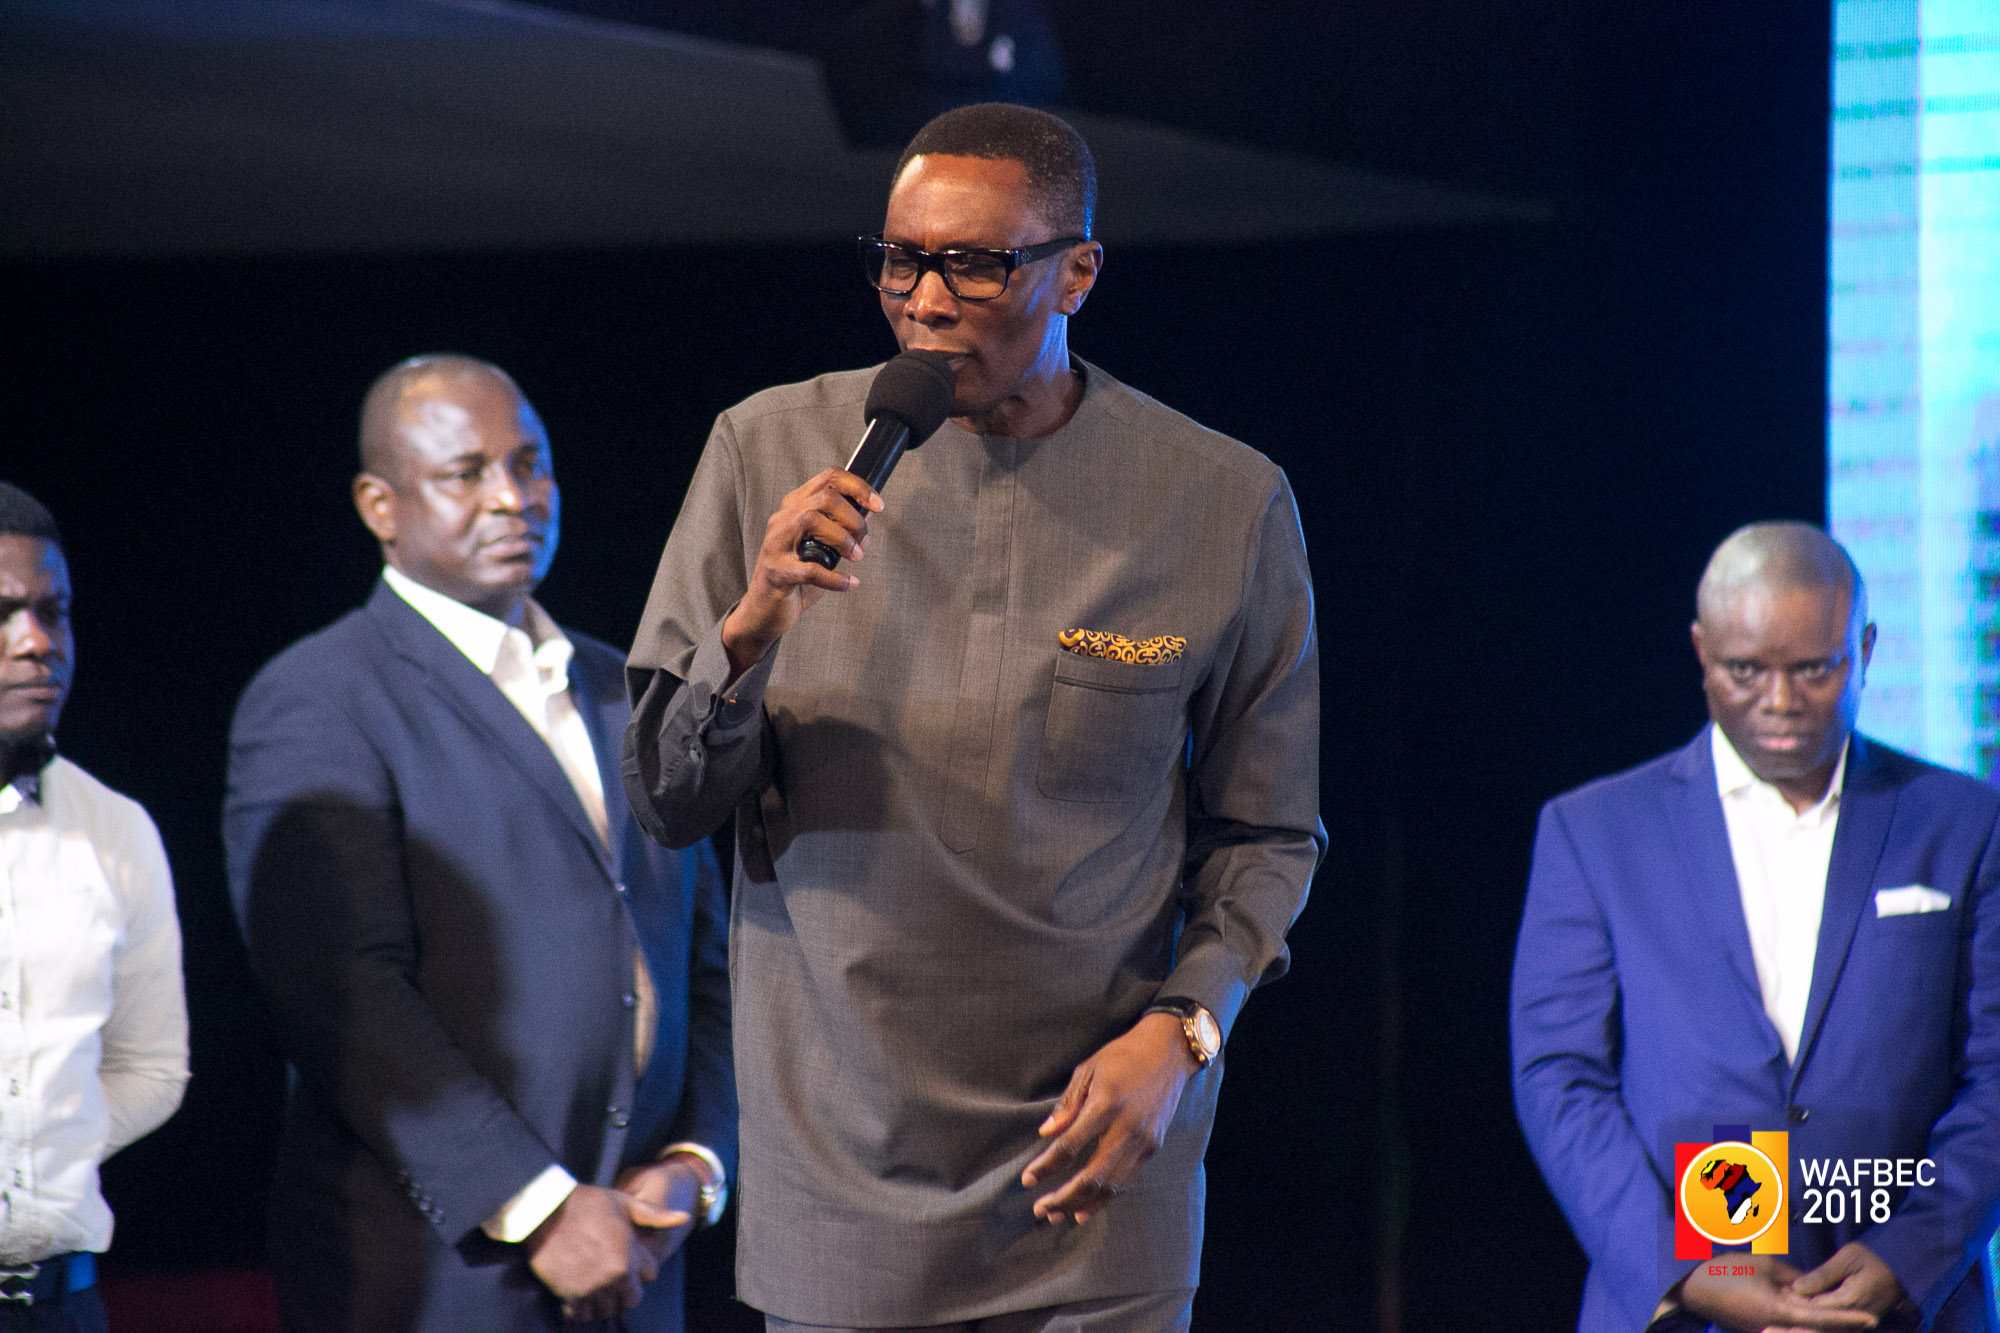 WAFBEC 2018 – DAY 2 (EVENING SESSION 1) with PASTOR TONY RAPU